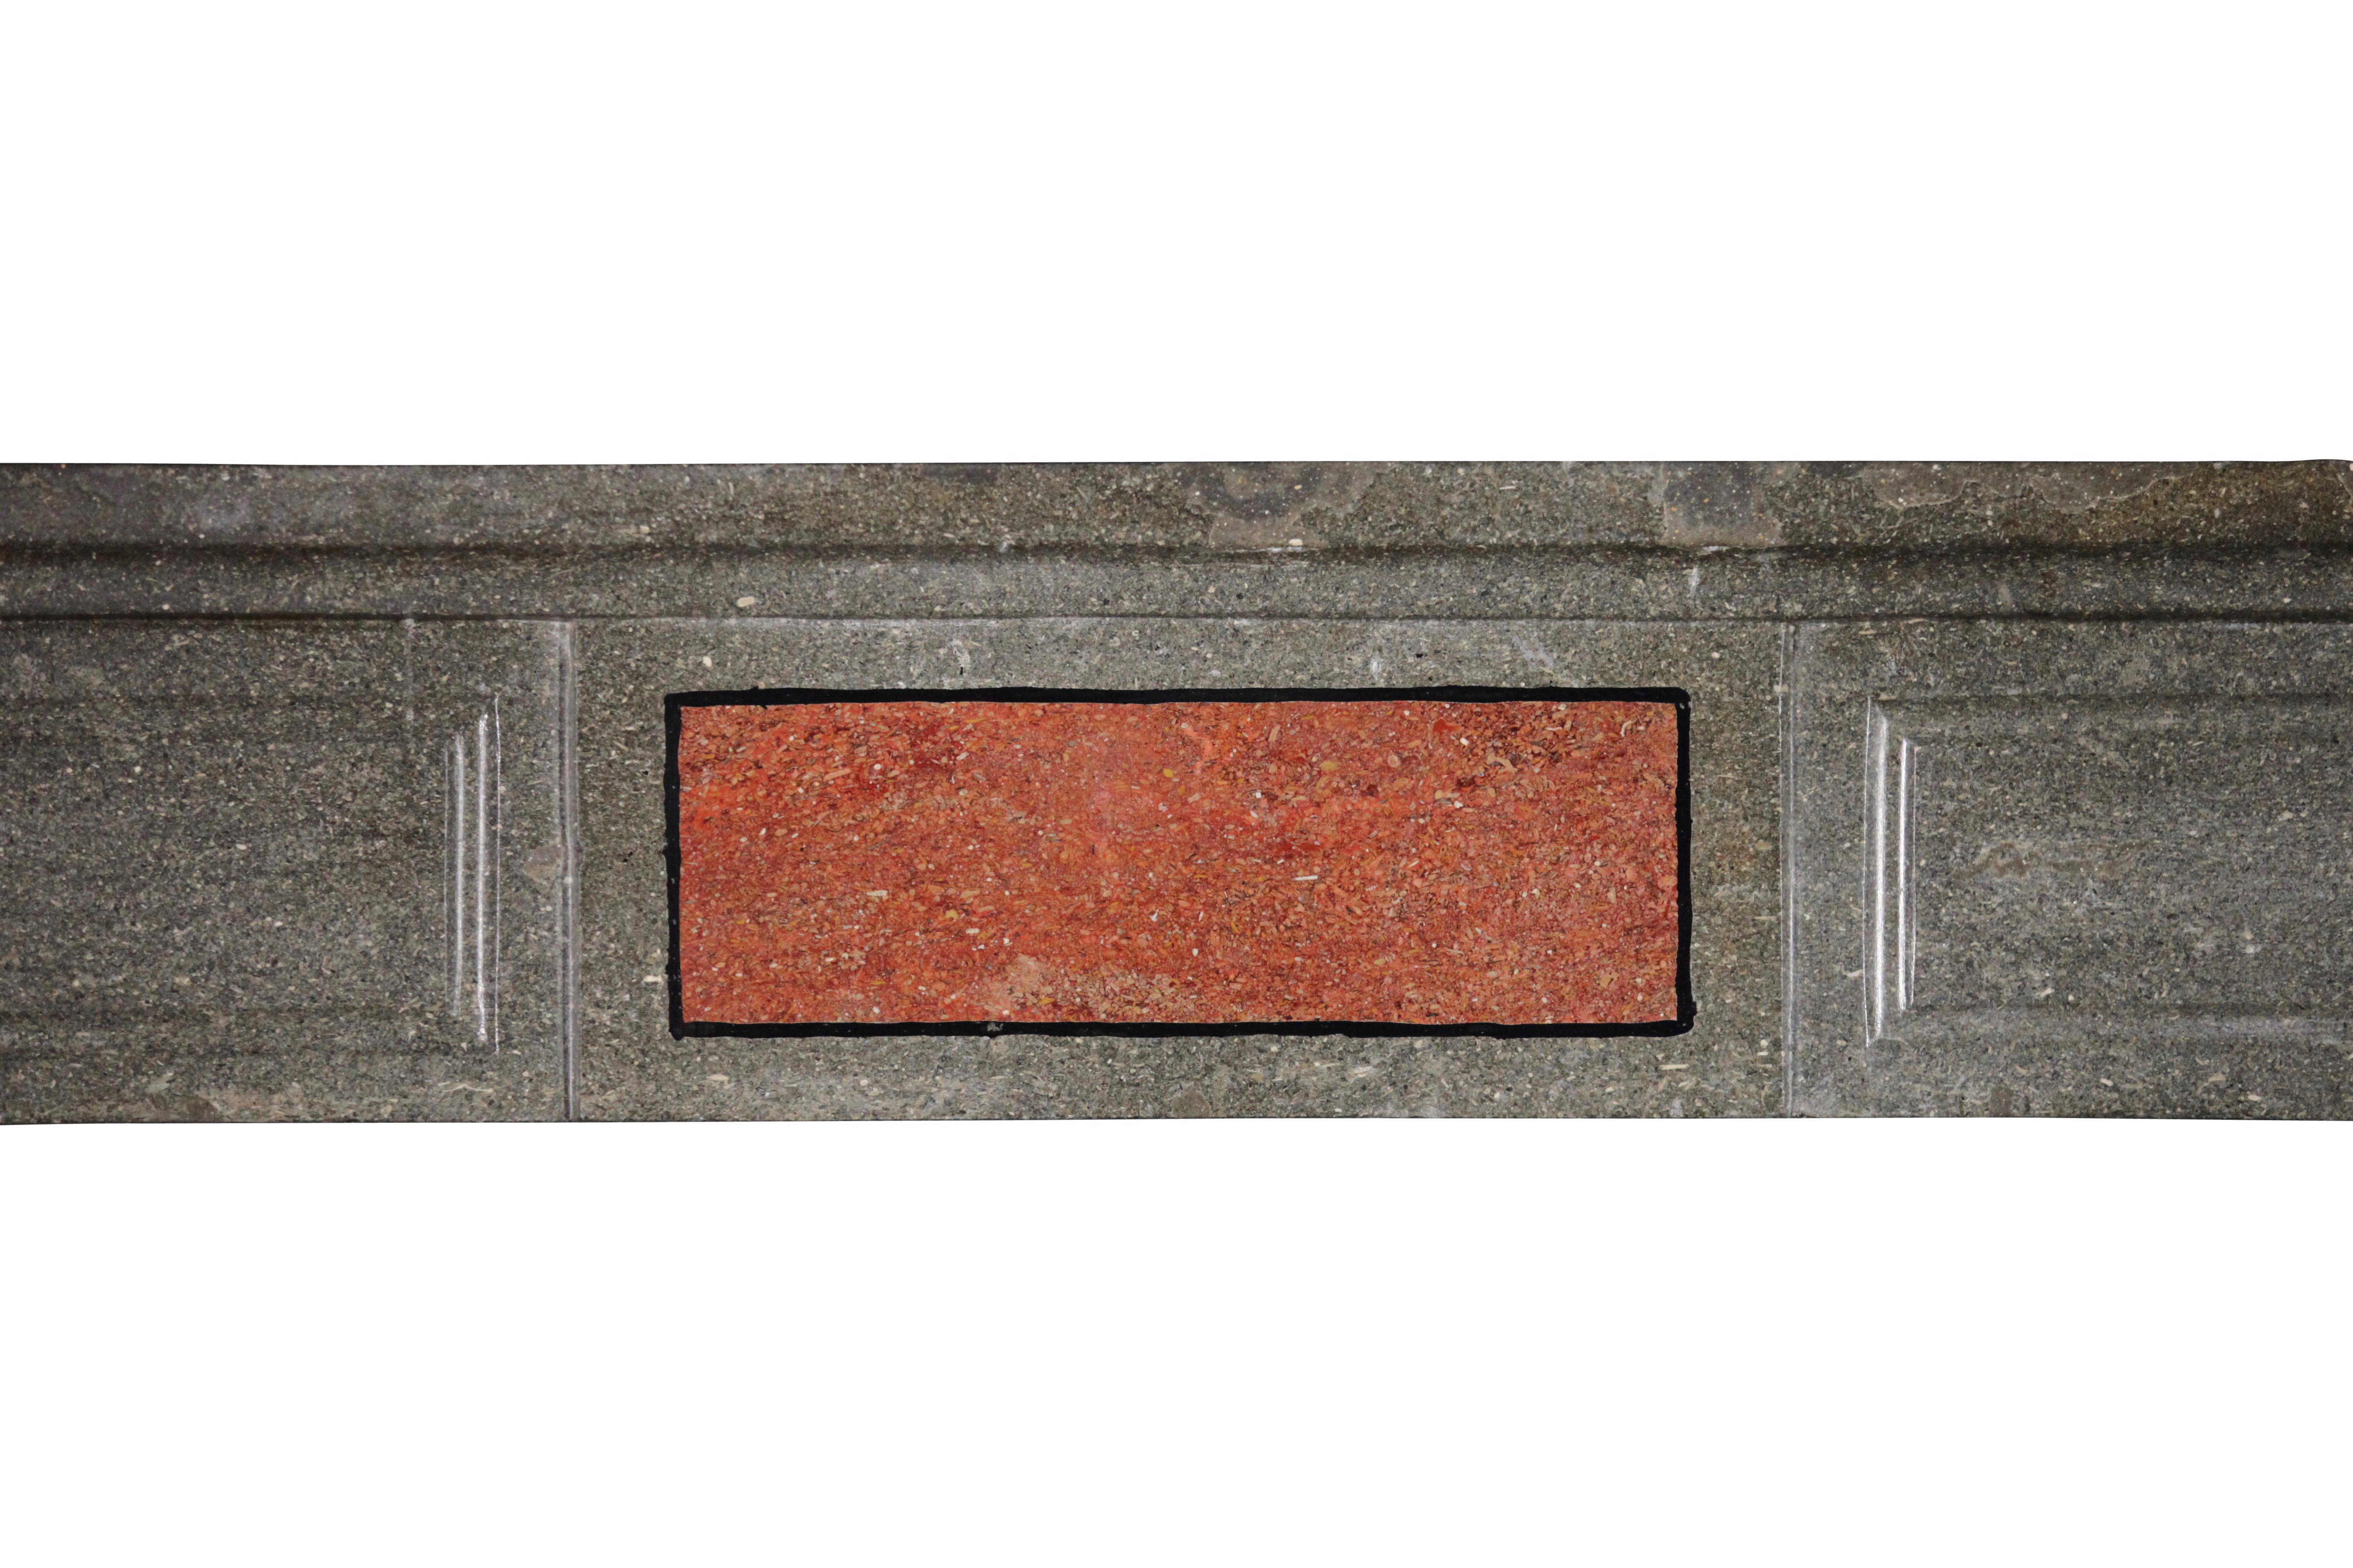 A quite special original antique fireplace surround in Burgundy bicolor marble hard stone with porfierstone inlay. The different colors and straight lines makes that this could perfectly match a Art-Deco or modern interior to a pured minimalistique